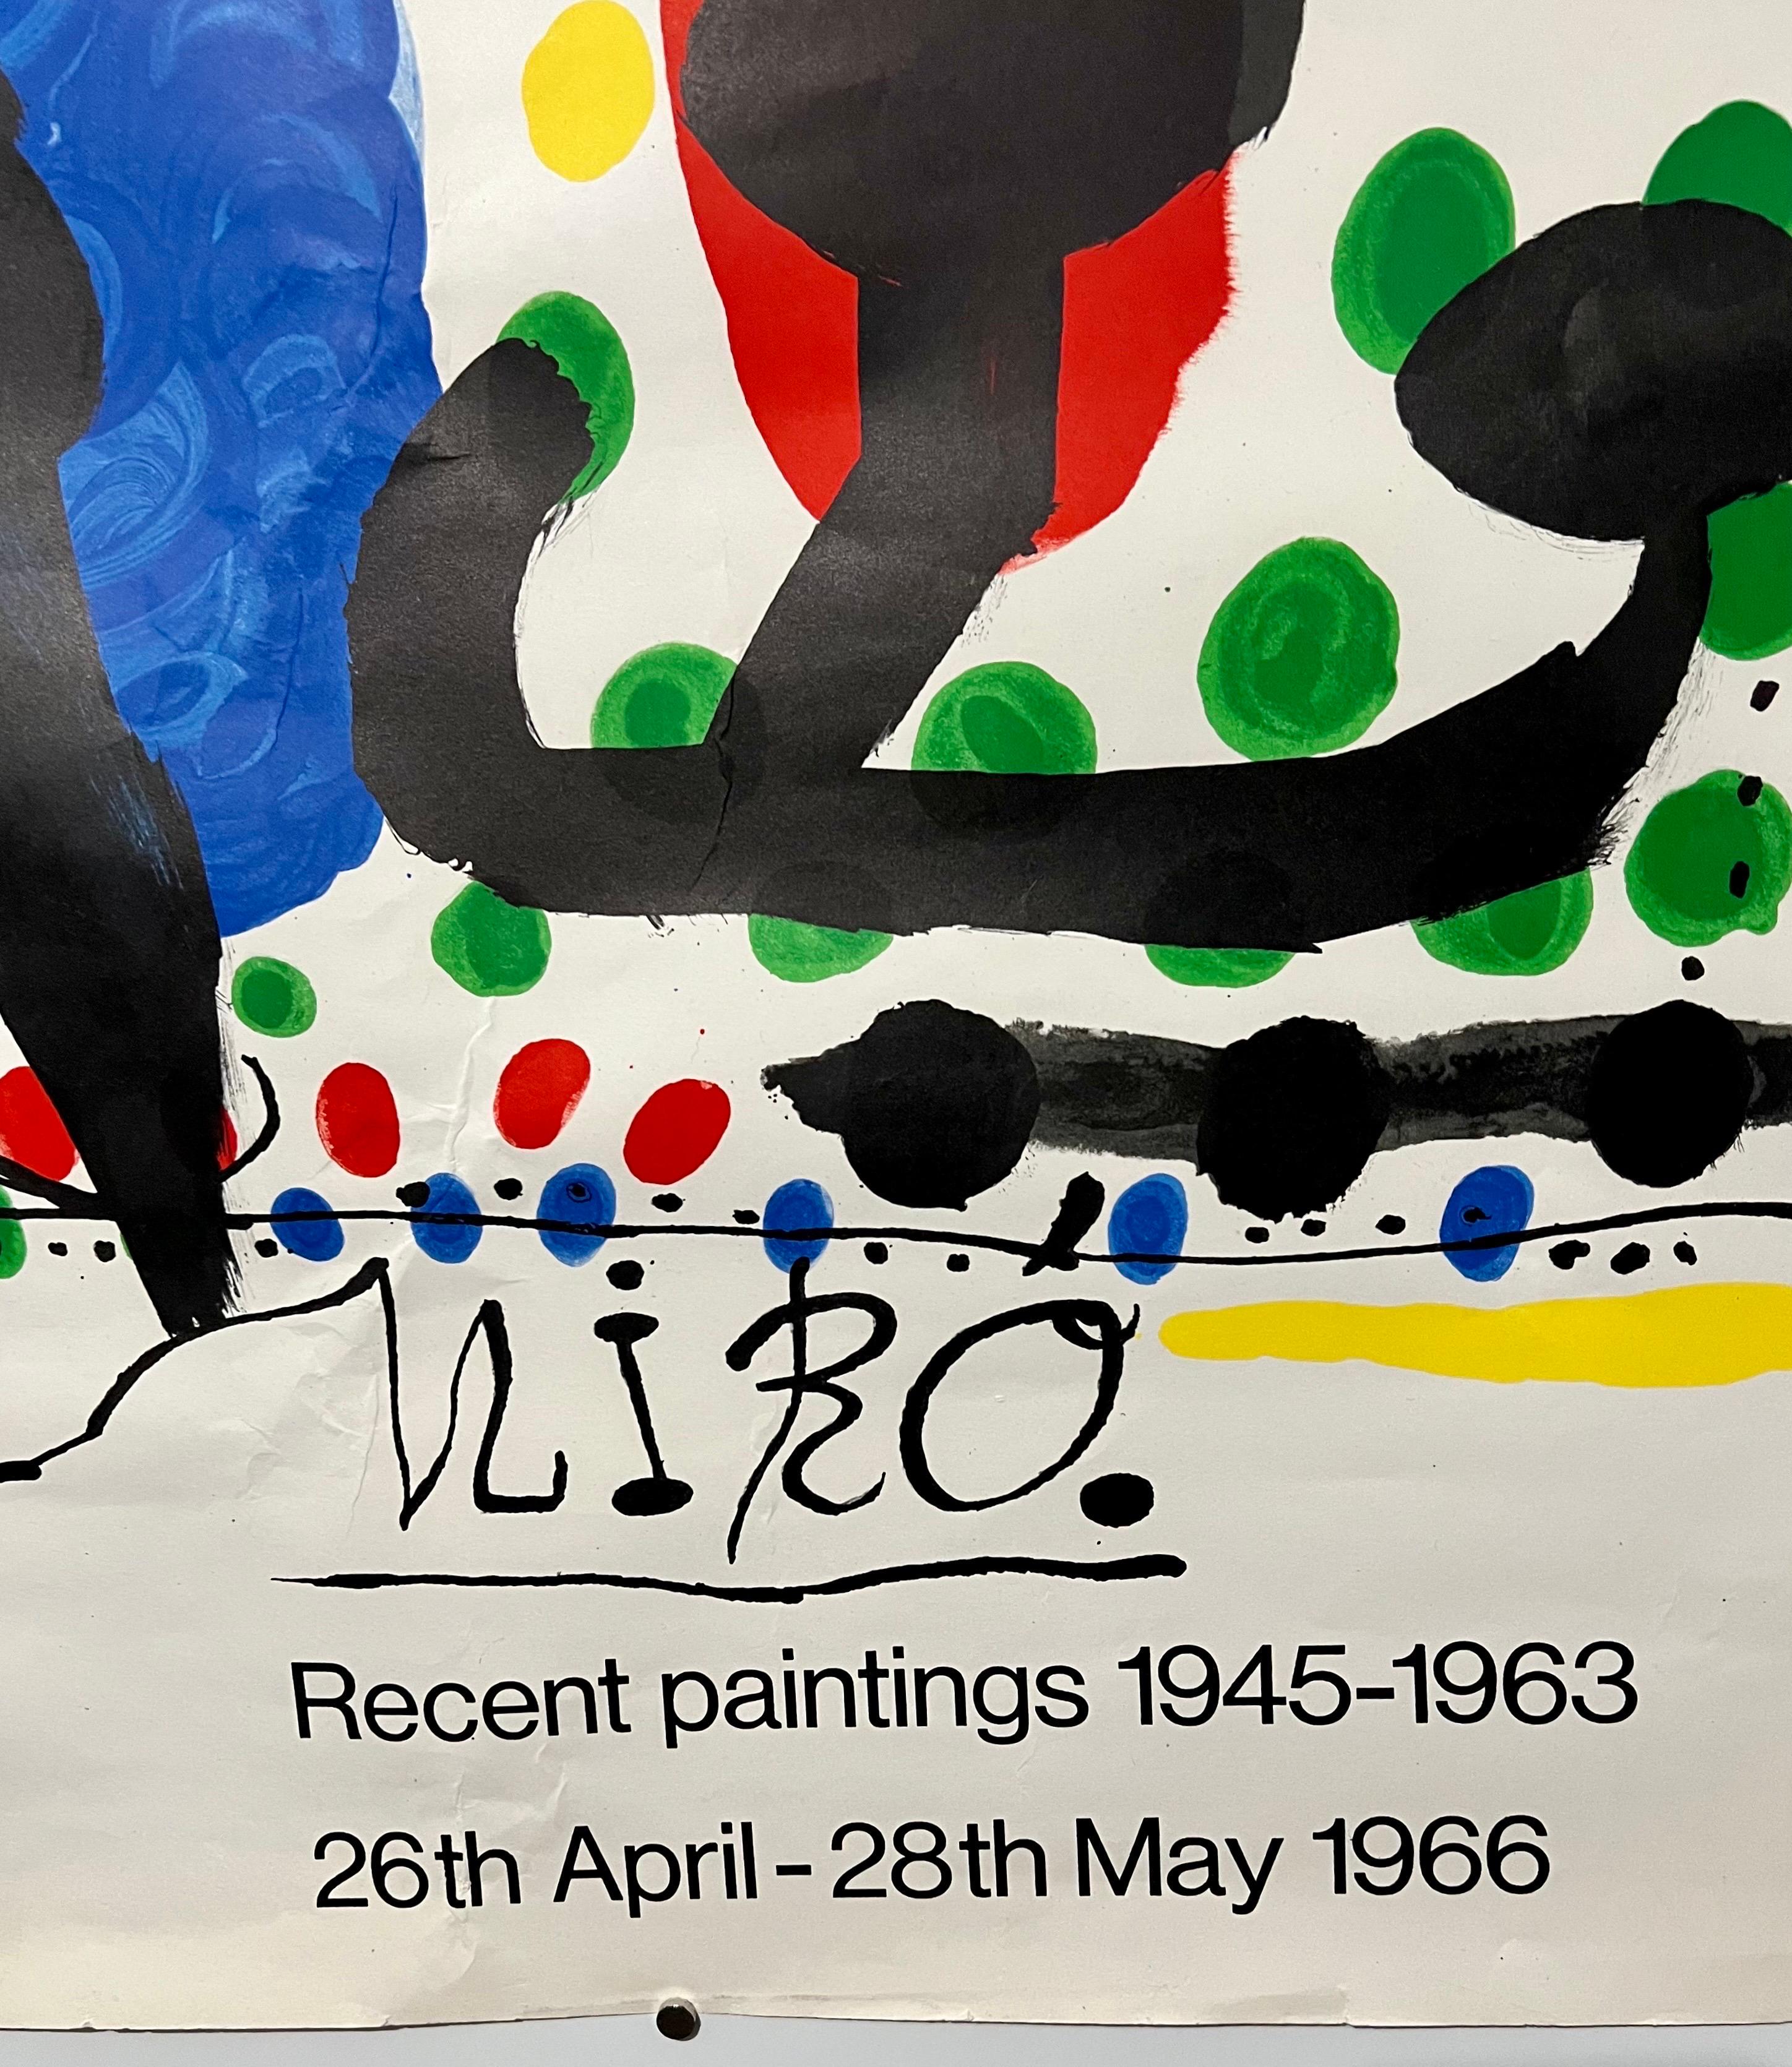 Joan Miro Vintage Surrealist Lithograph Poster Adrien Maeght Marlborough Gallery - White Abstract Print by Joan Miró